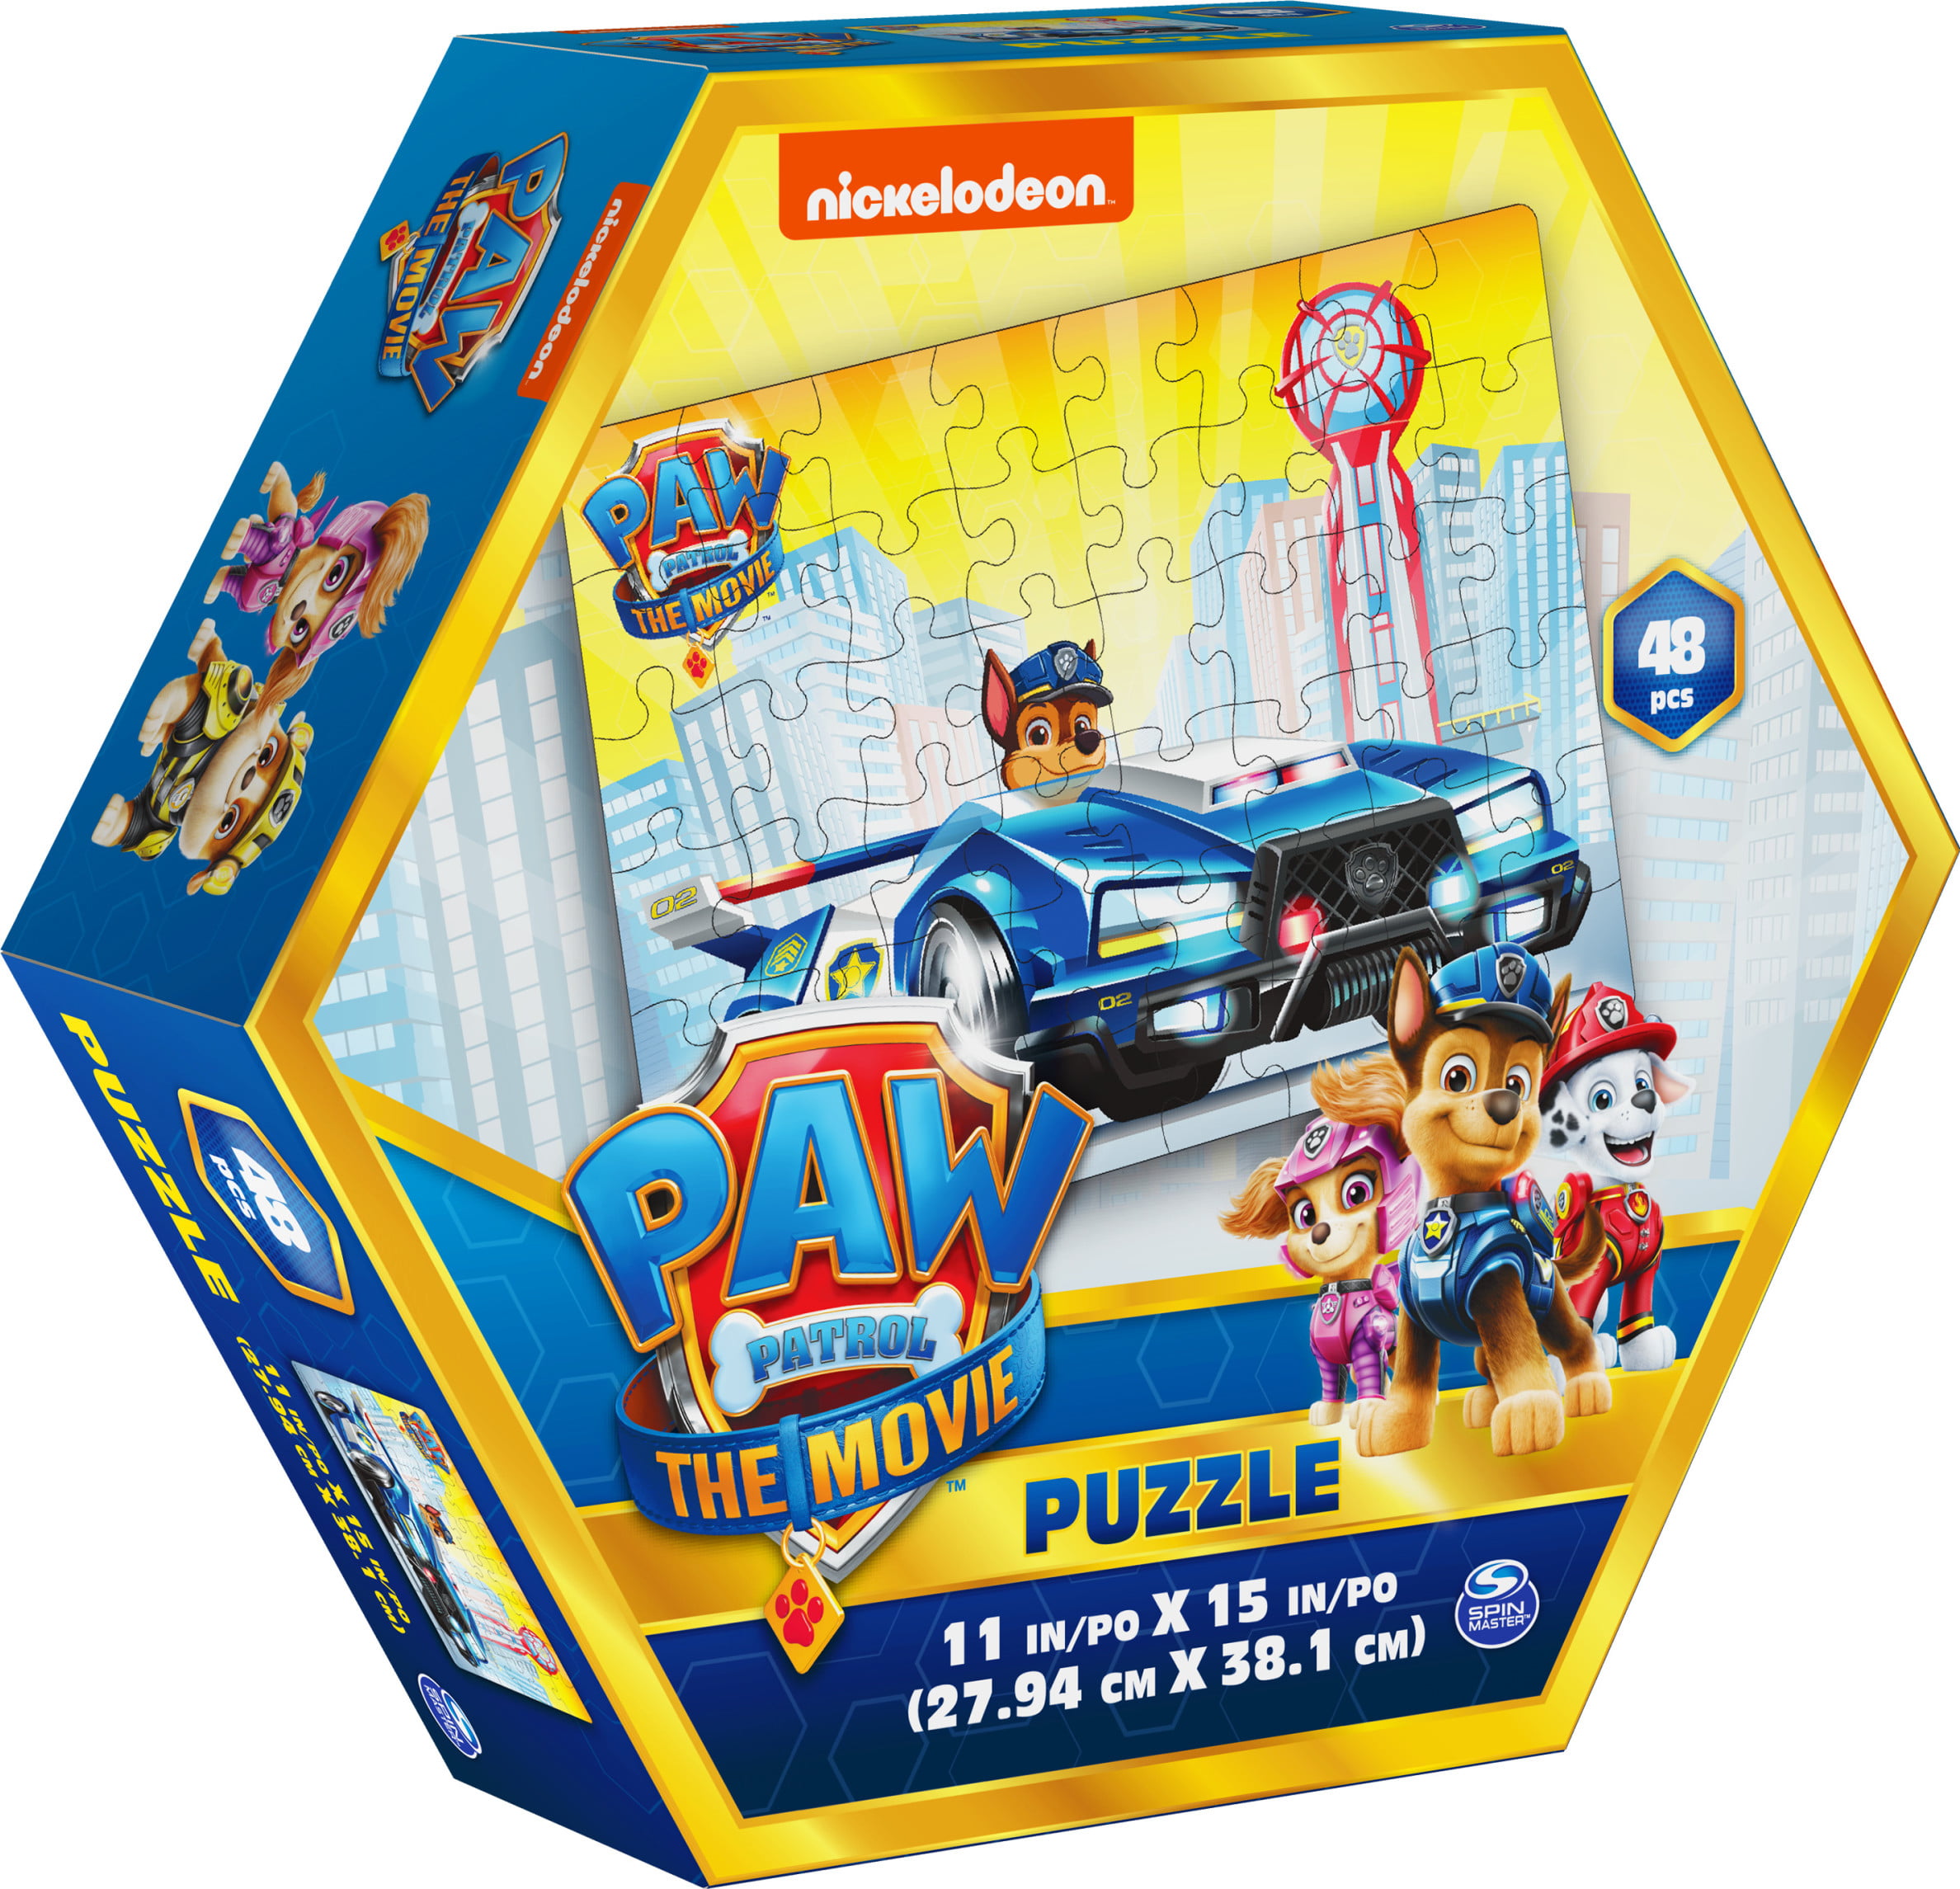 Fremme antydning arrestordre PAW Patrol The Movie, 48 Piece Jigsaw Puzzle for Kids Ages 4 and up, Chase  - Walmart.com